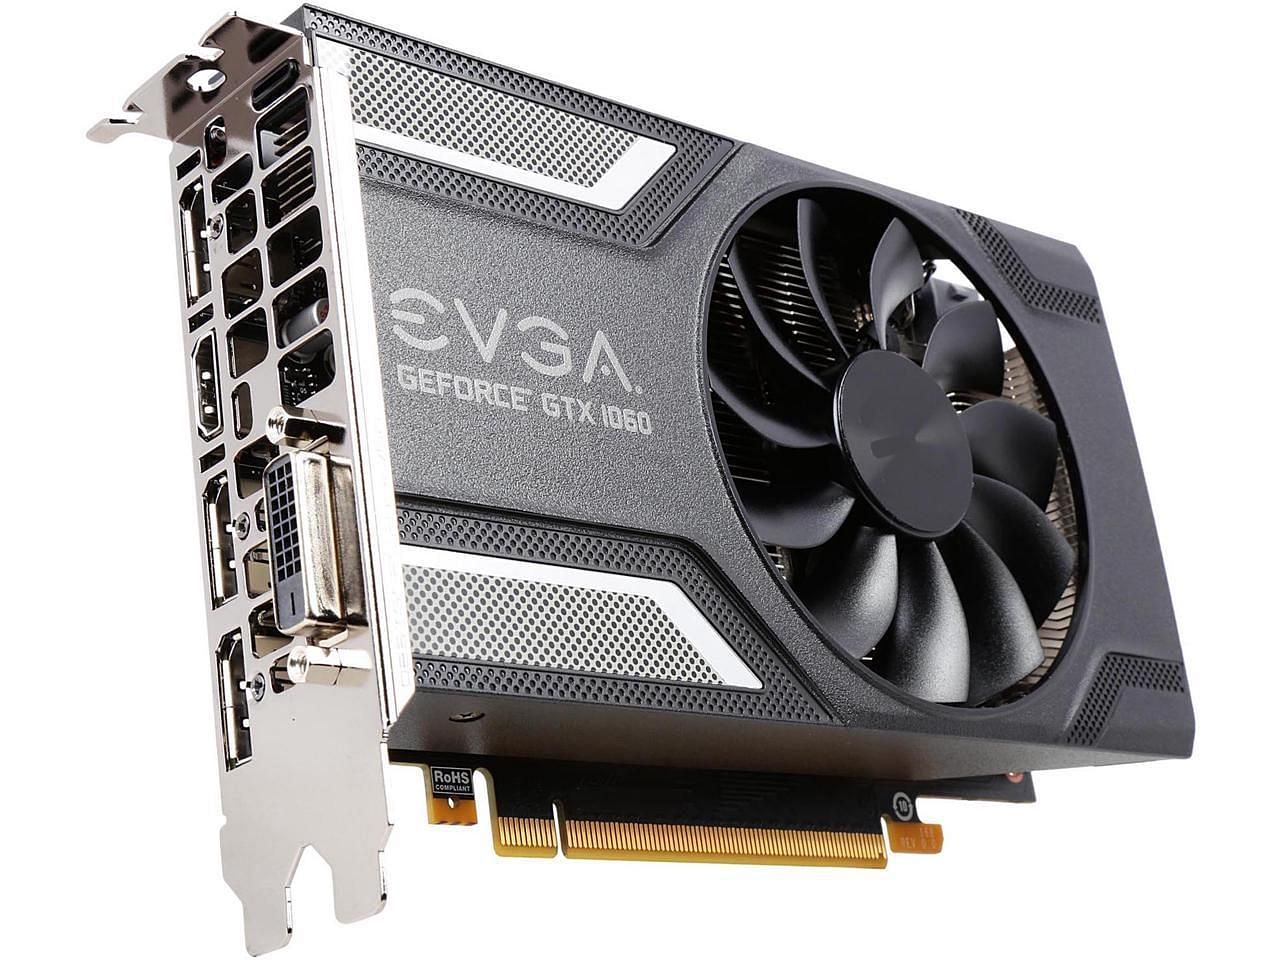 Nvidia GTX loses its crown as the most popular GPU in Steam Survey, GTX 1650 claims the title